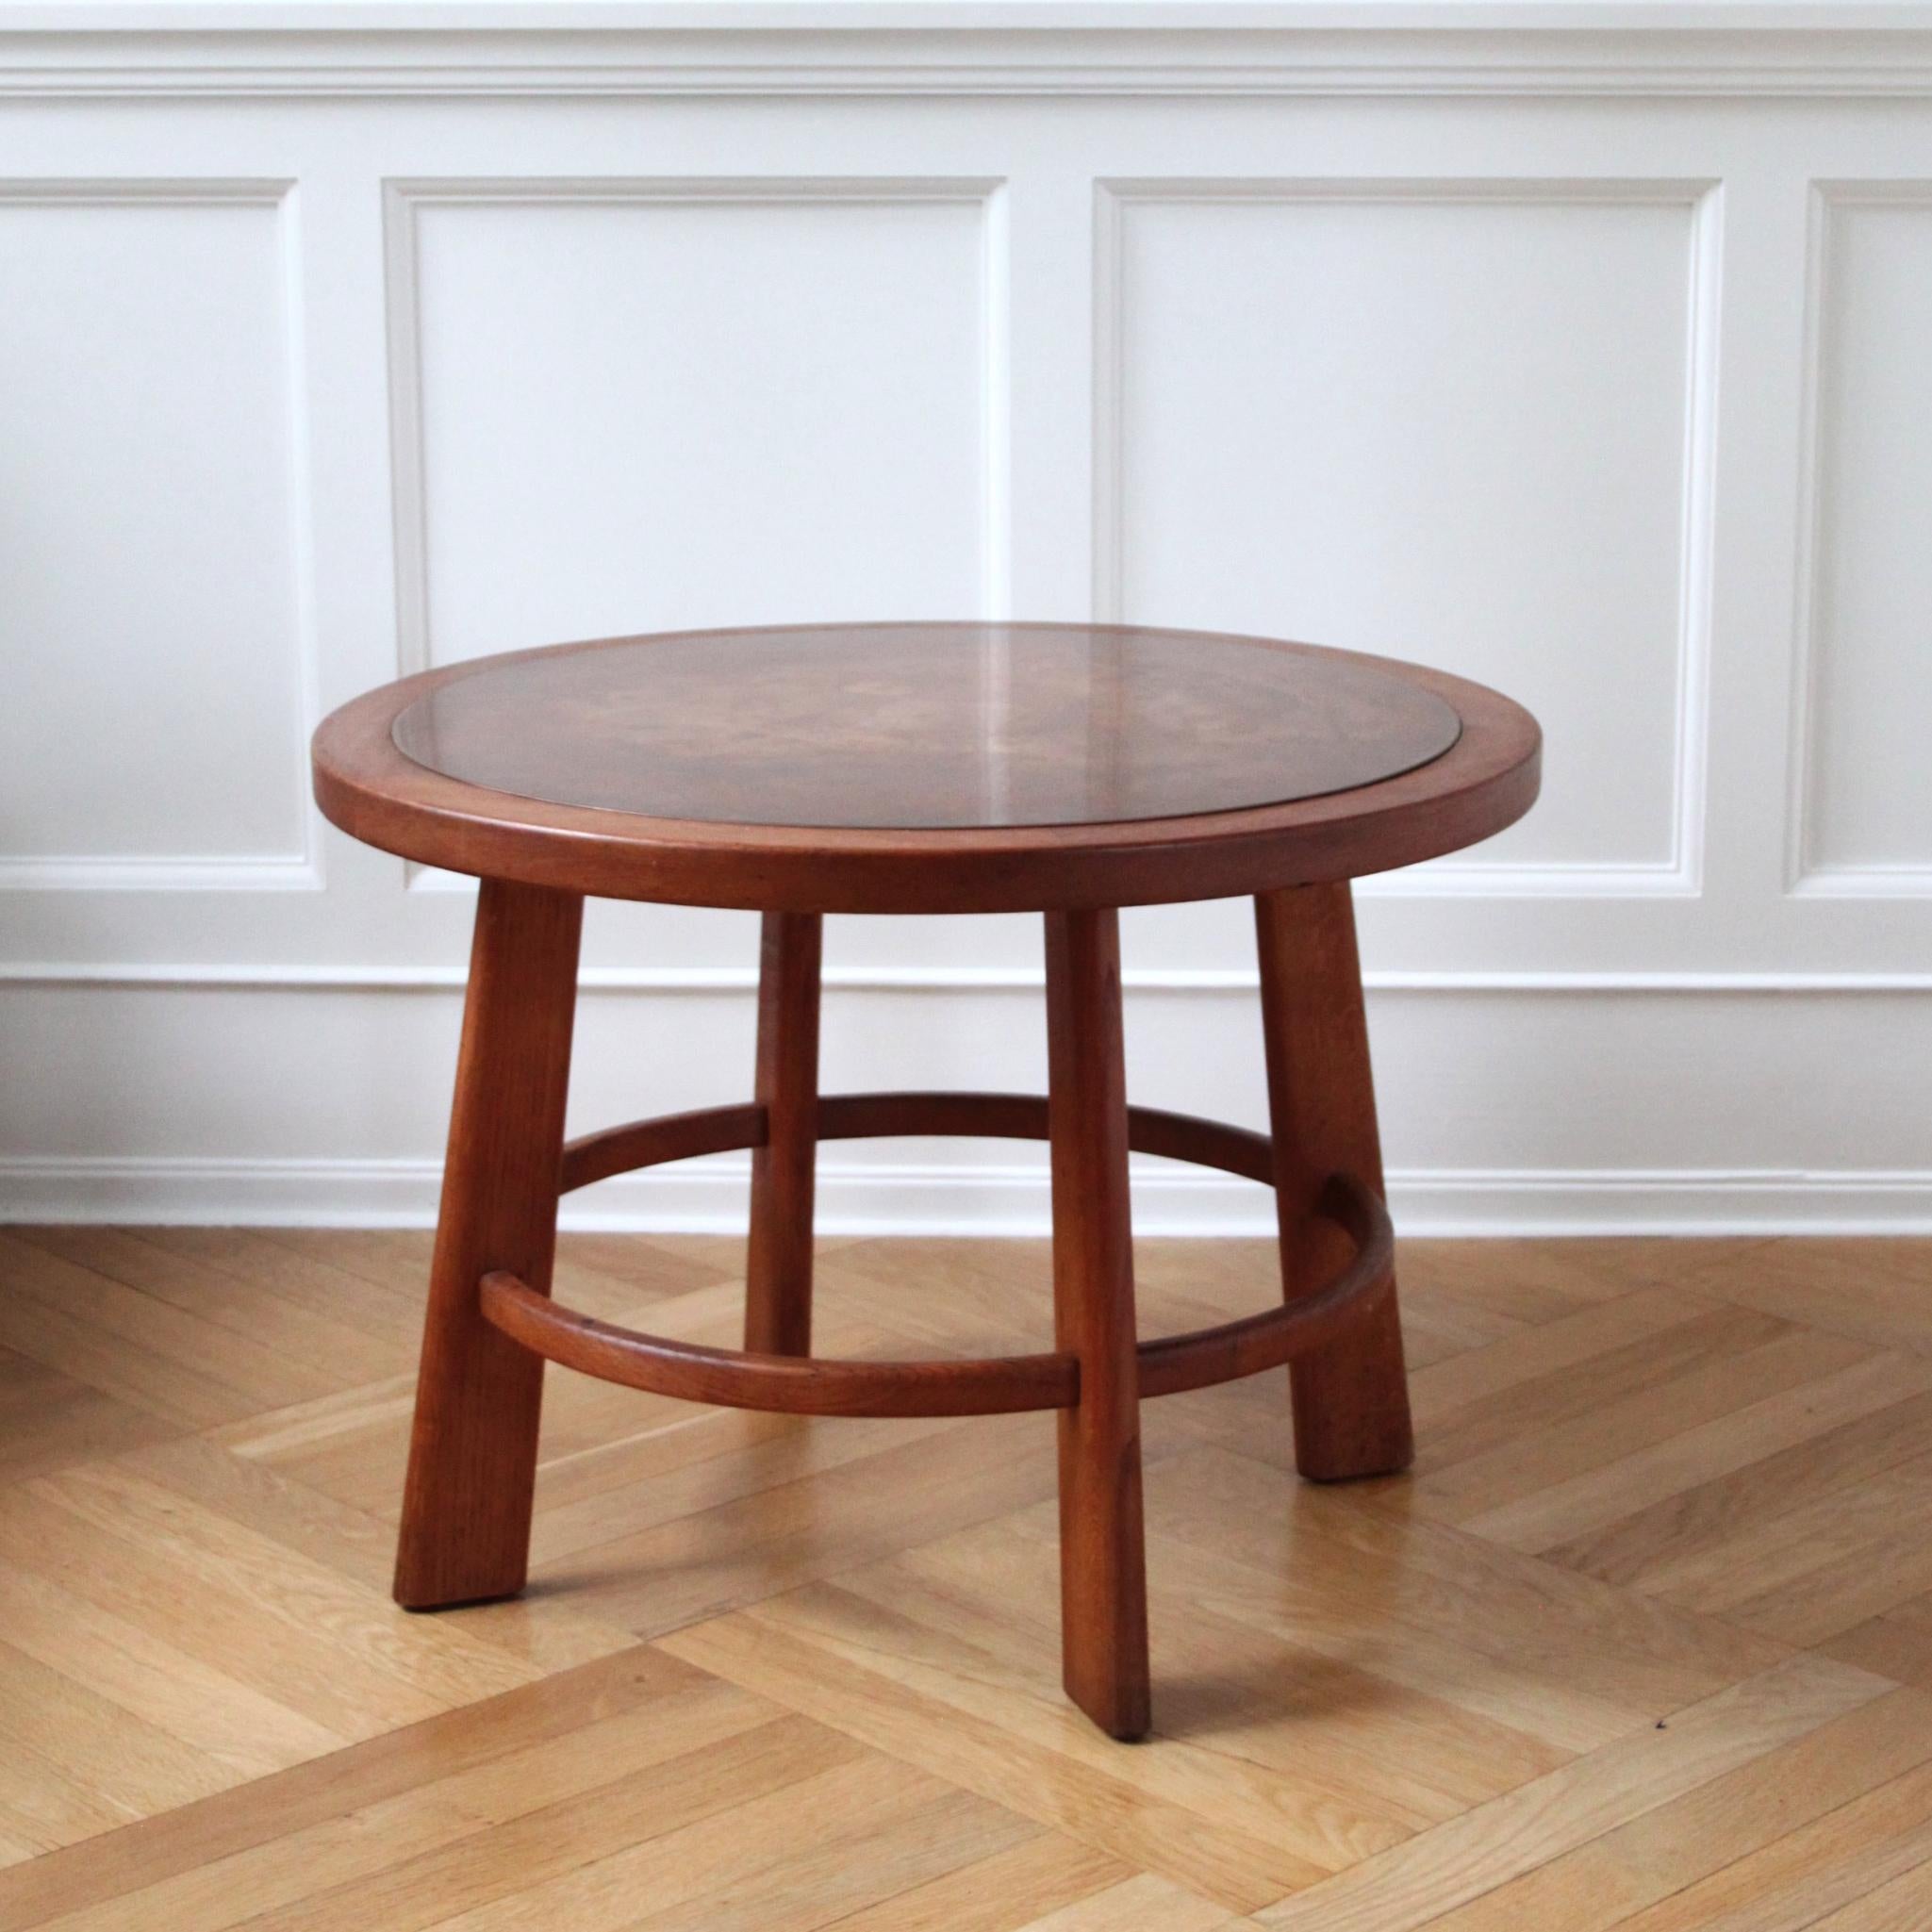 Otto Færge Coffee Table in Oak and Copper, Denmark 1940s 1